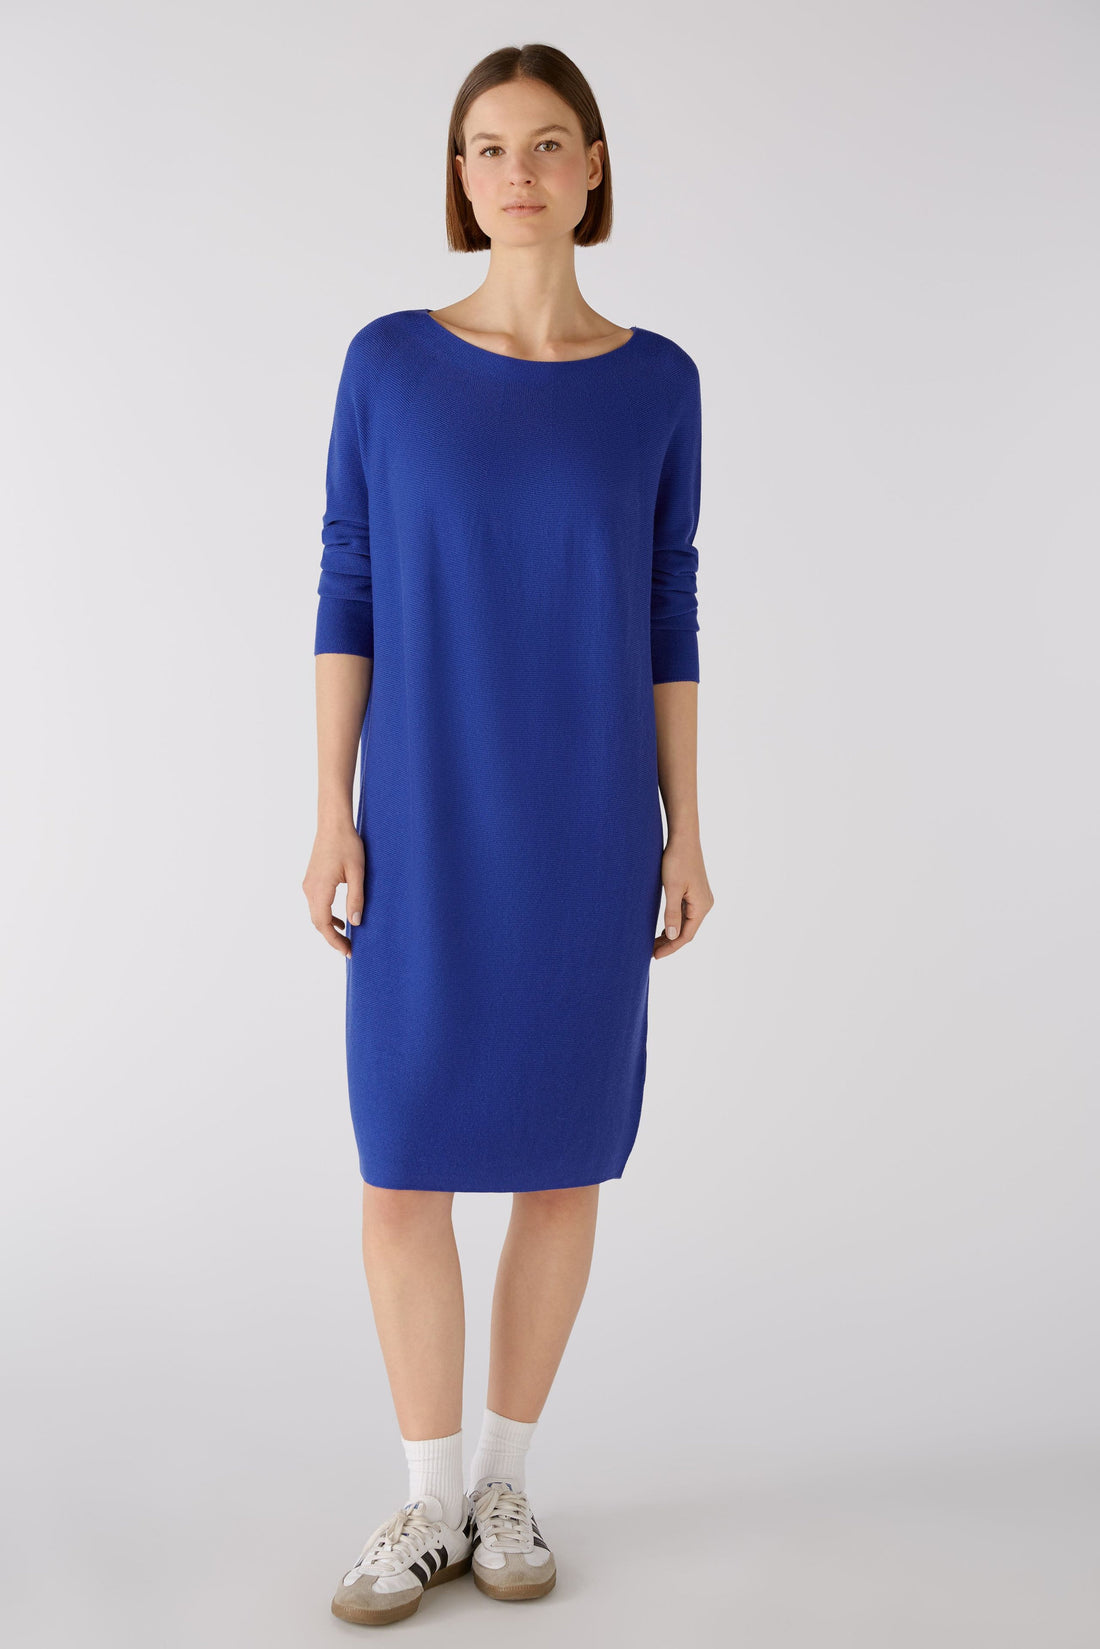 Knitted Dress In A Fine Viscose Blend With Silk_79013_5410_01